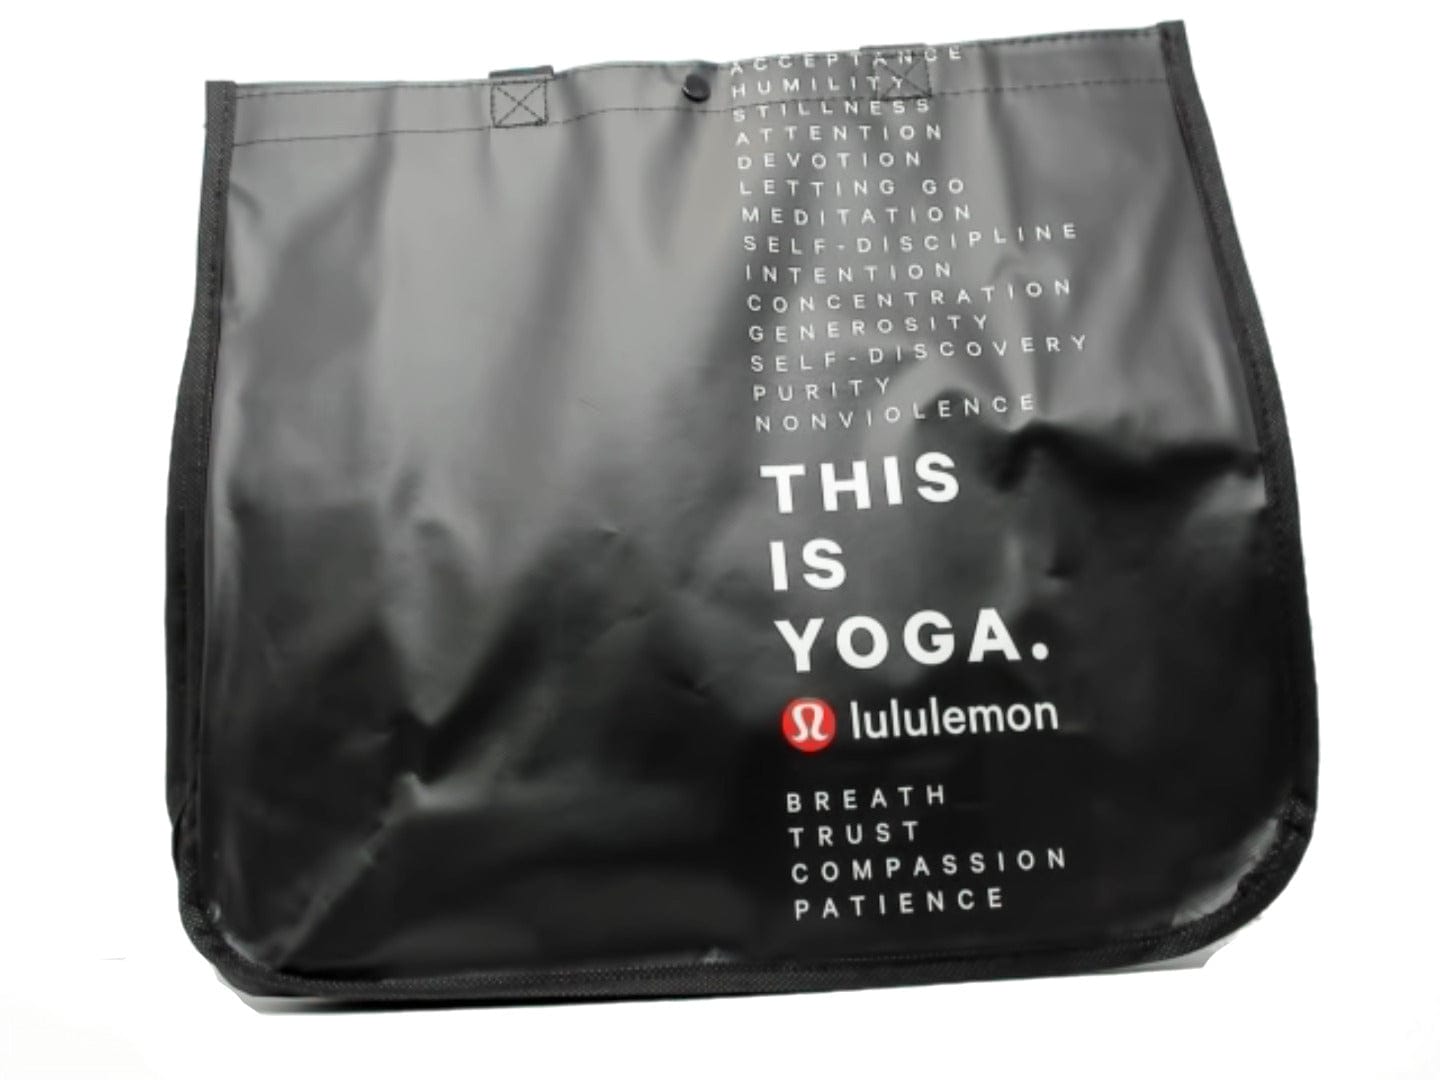 Lululemon large white and black shopping tote bags